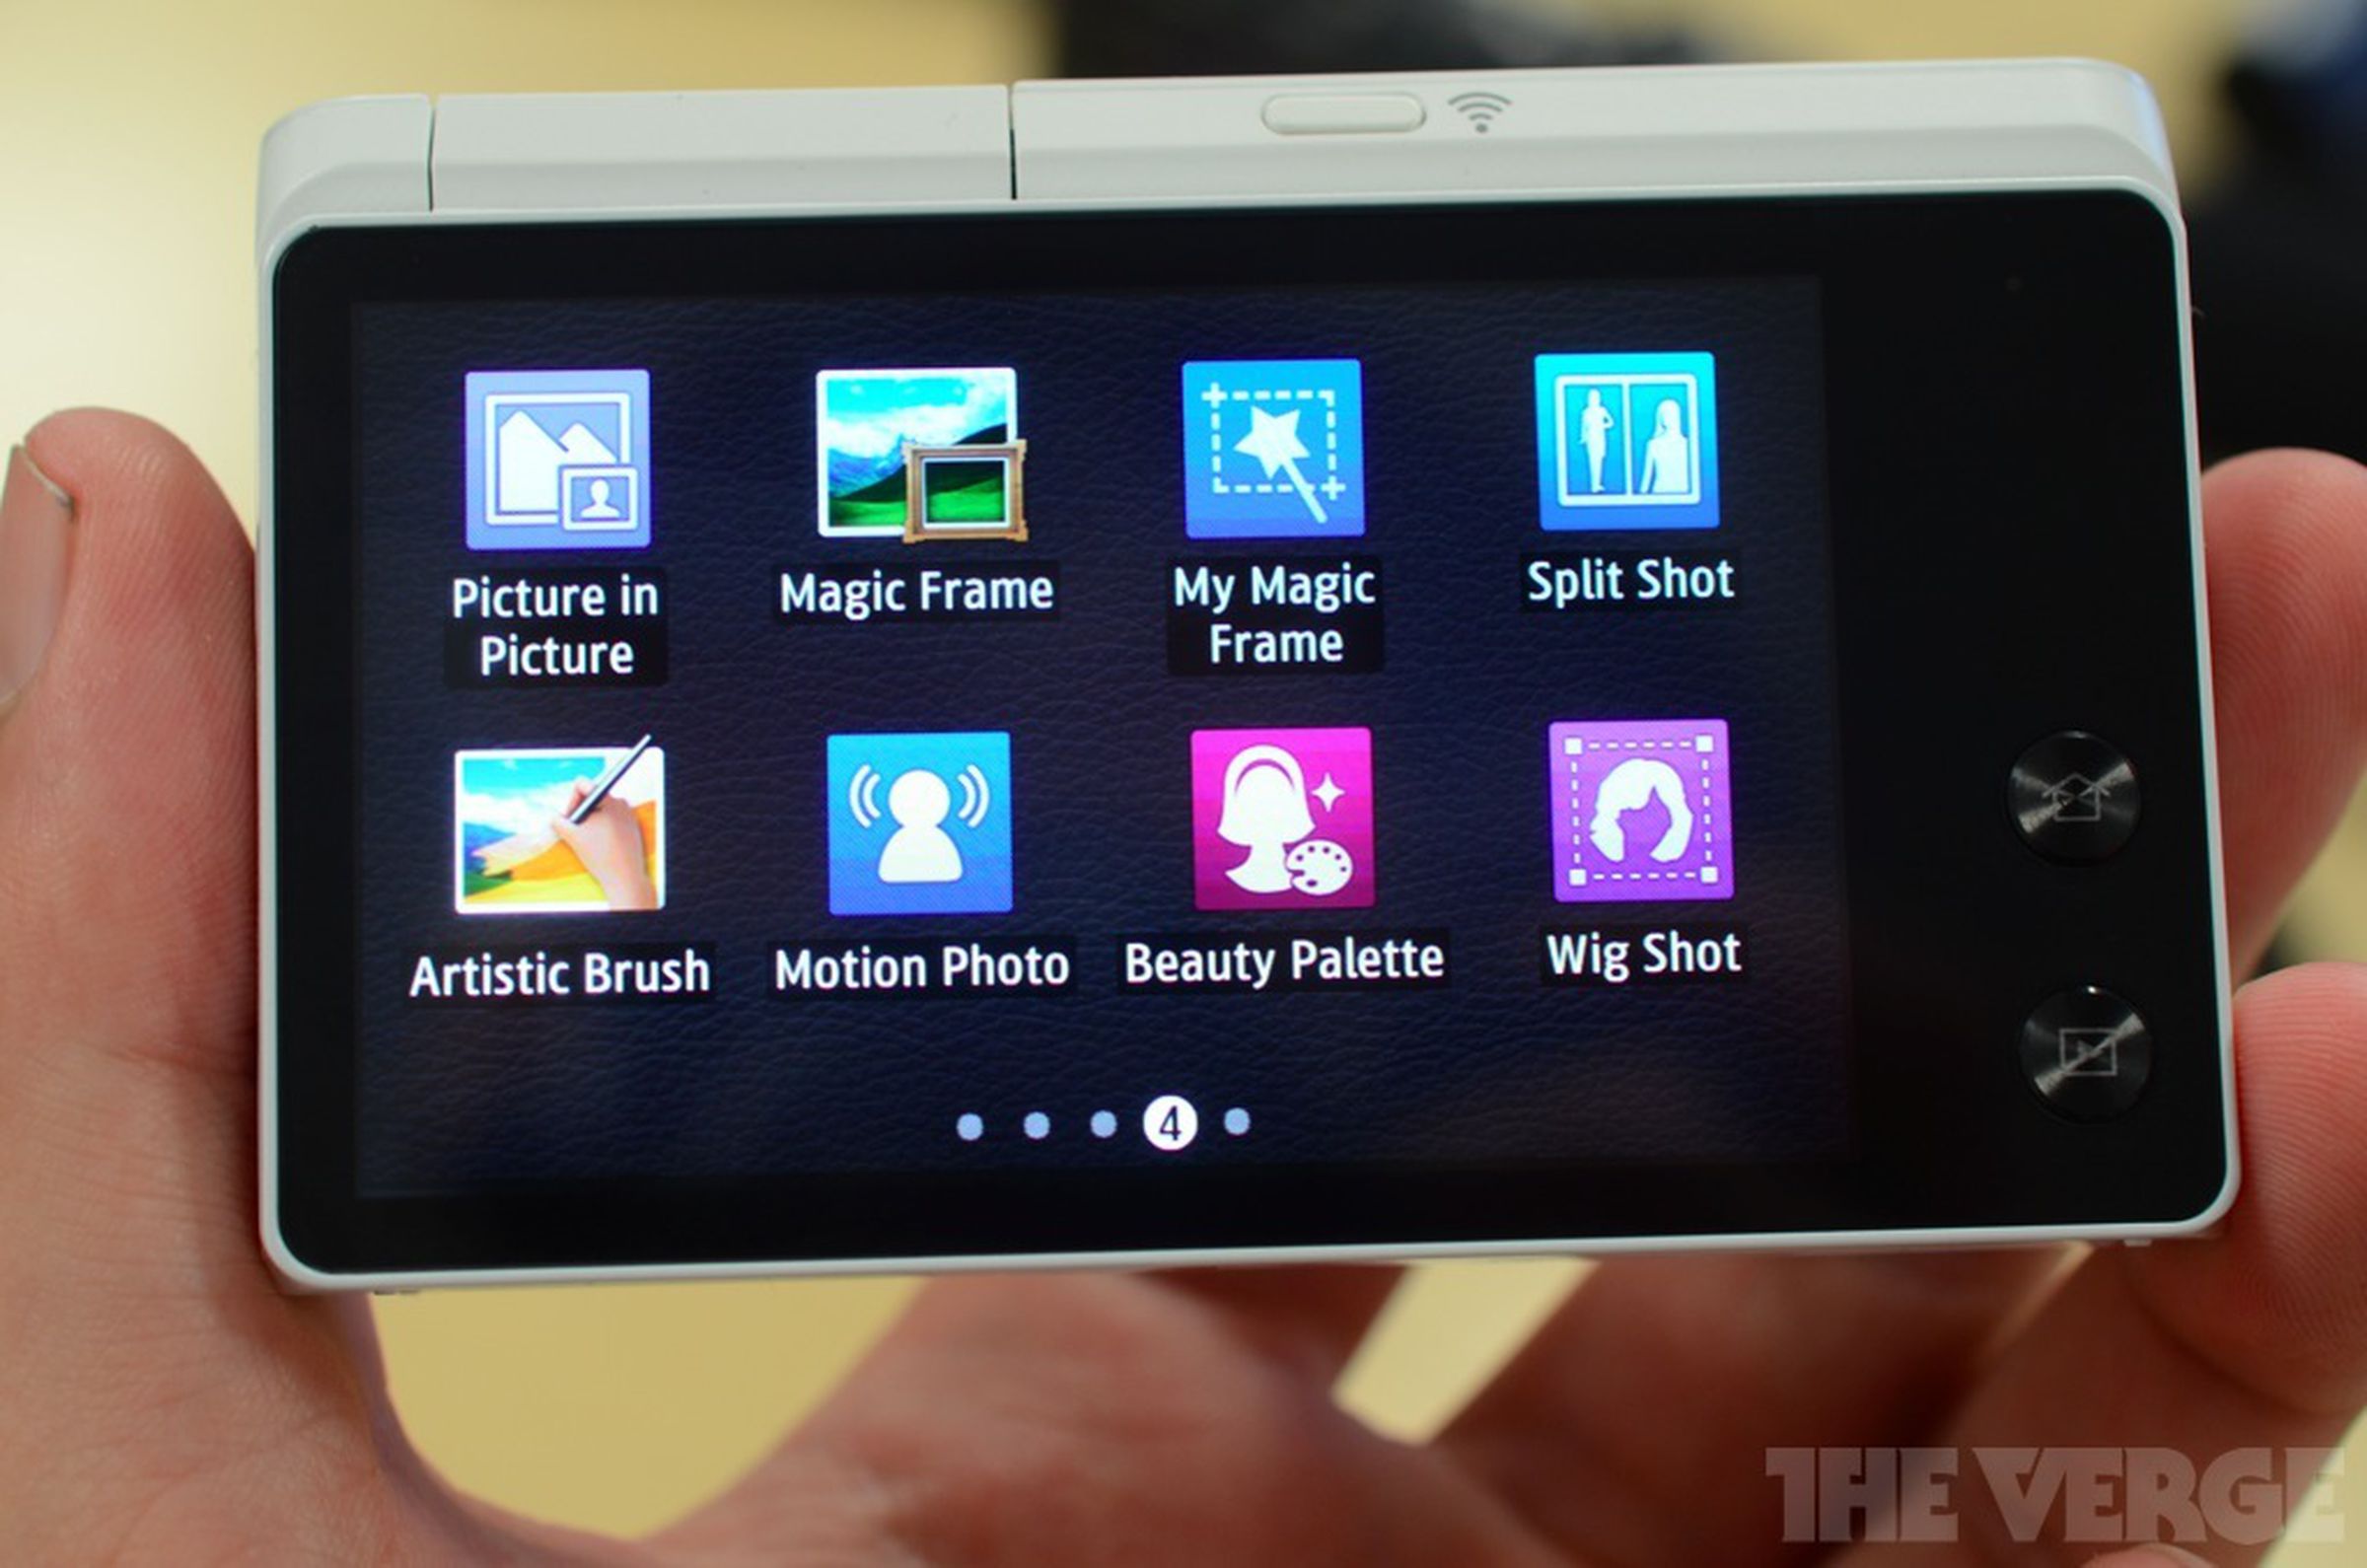 Samsung MV900F hands-on pictures